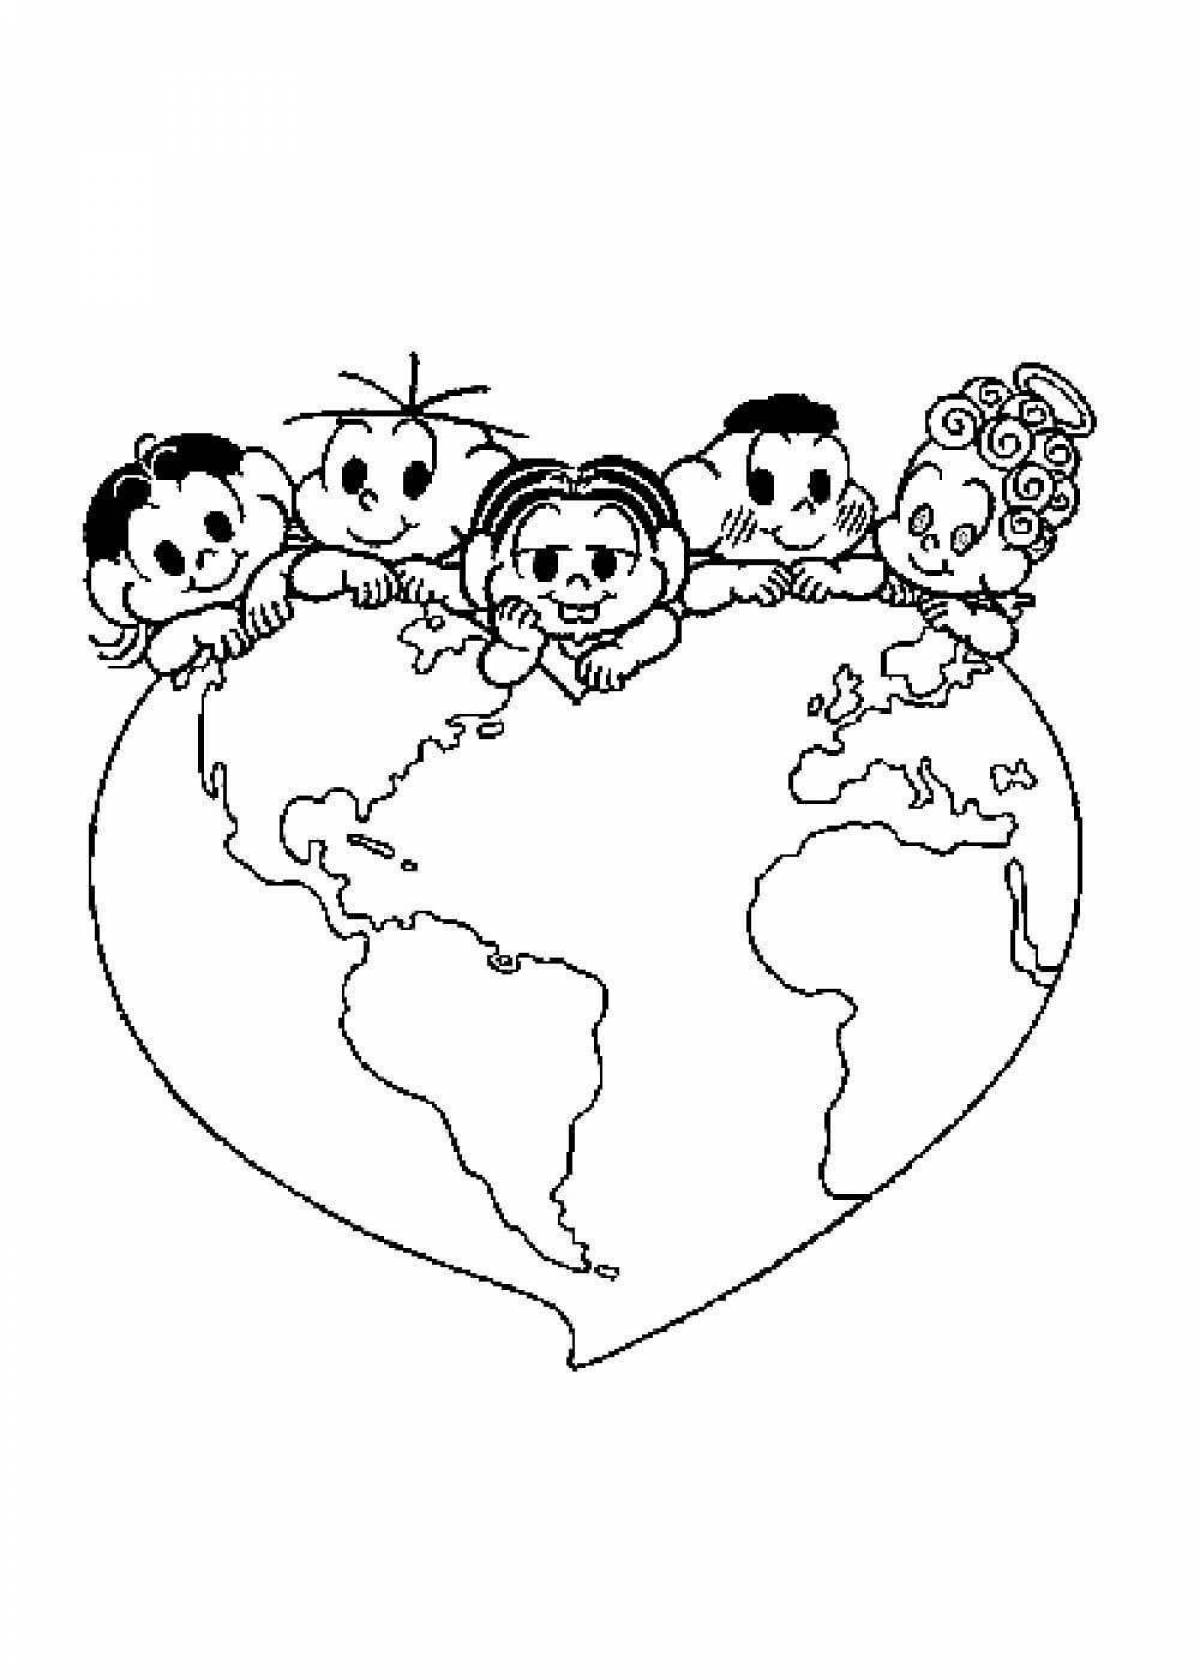 Coloring book peaceful world on earth